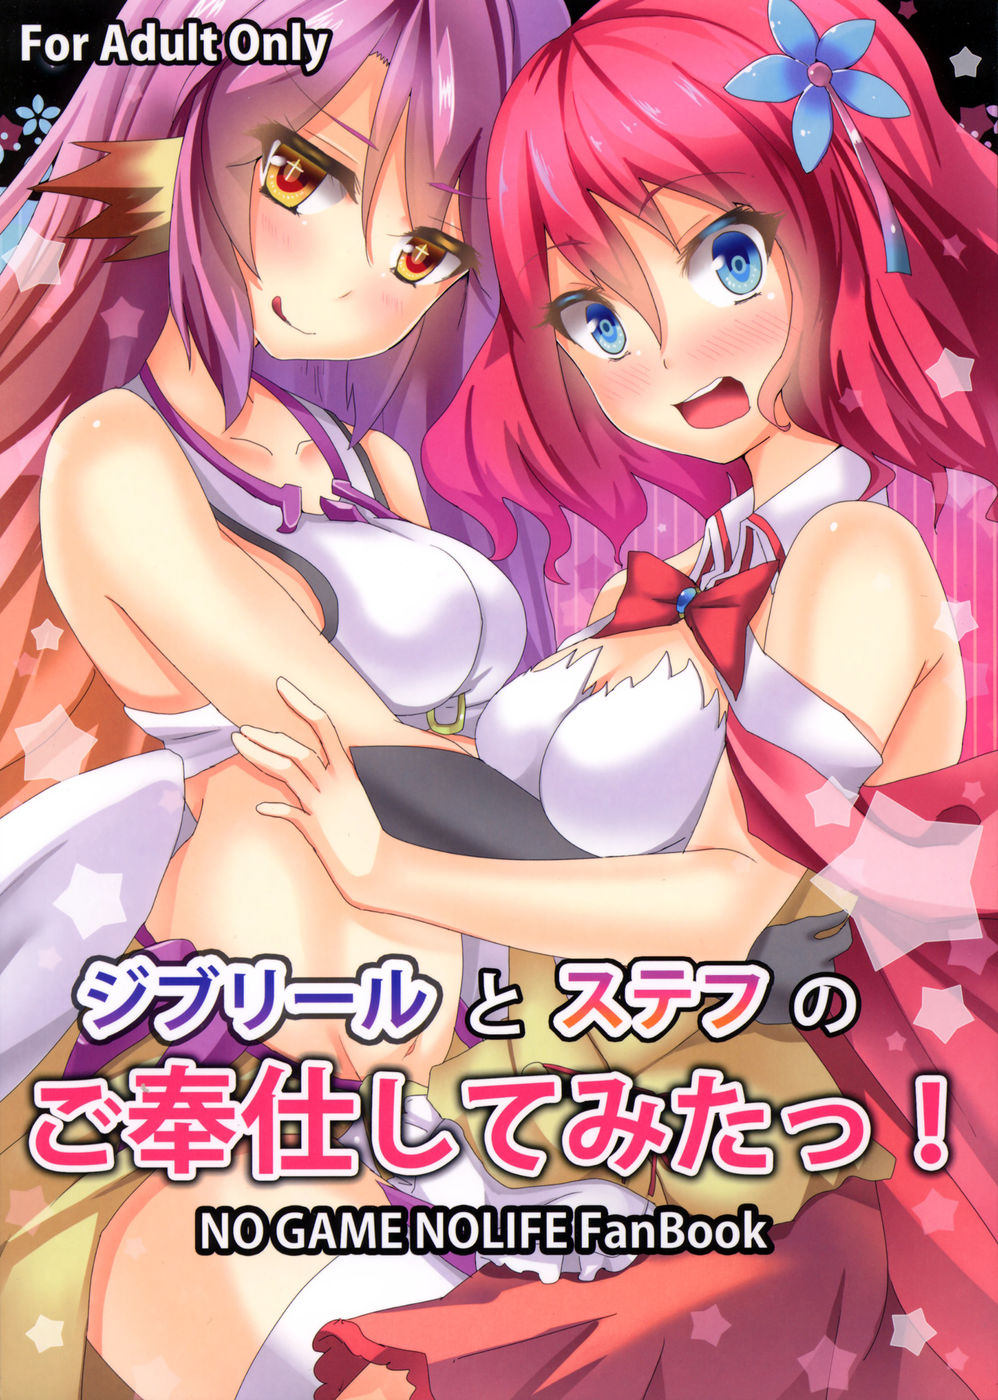 Hentai Manga Comic-Jibril and Steph's Attempt at Service!-Read-1